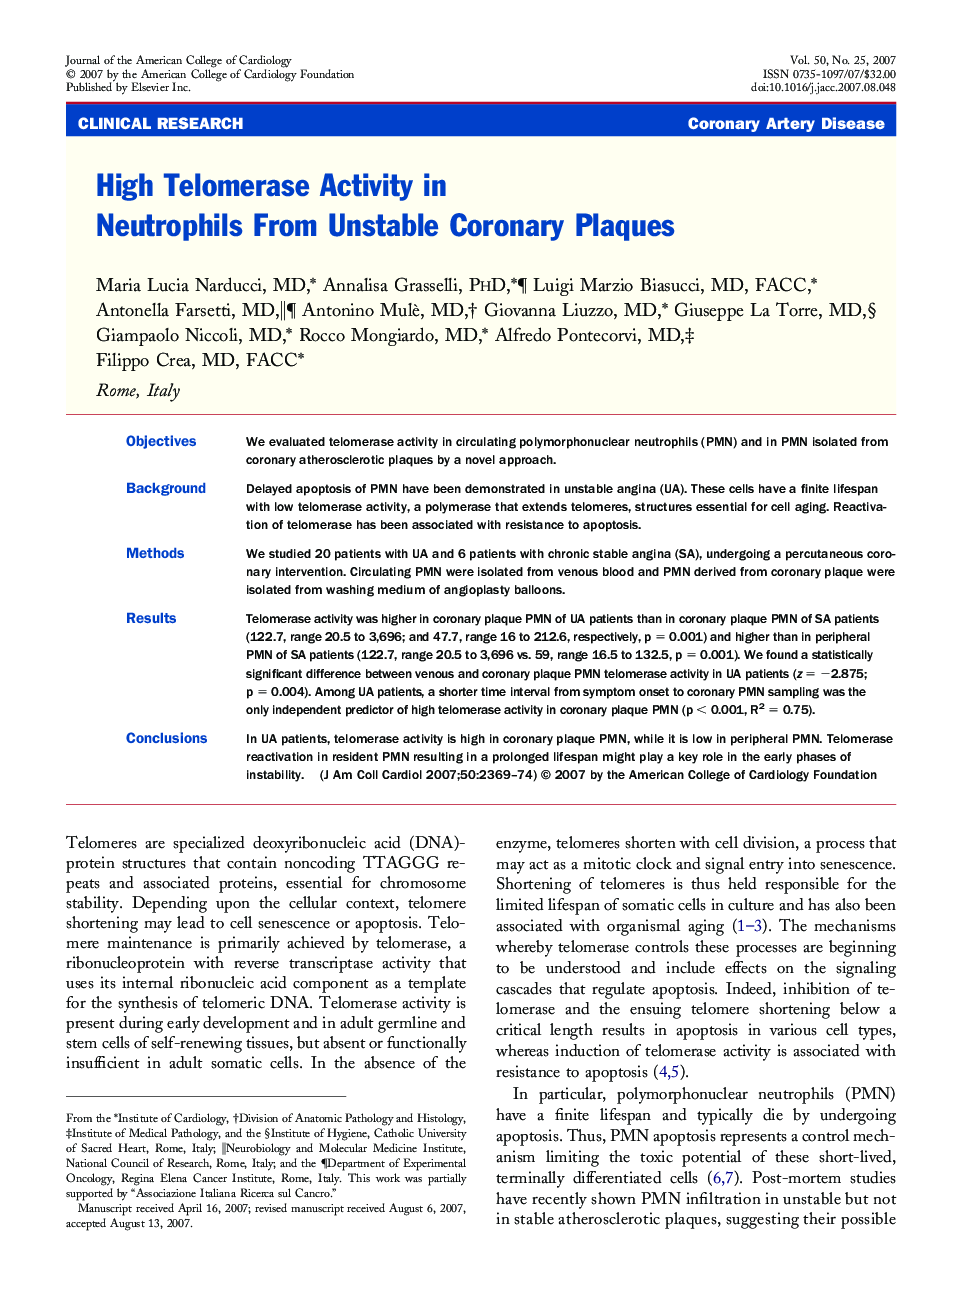 High Telomerase Activity in Neutrophils From Unstable Coronary Plaques 